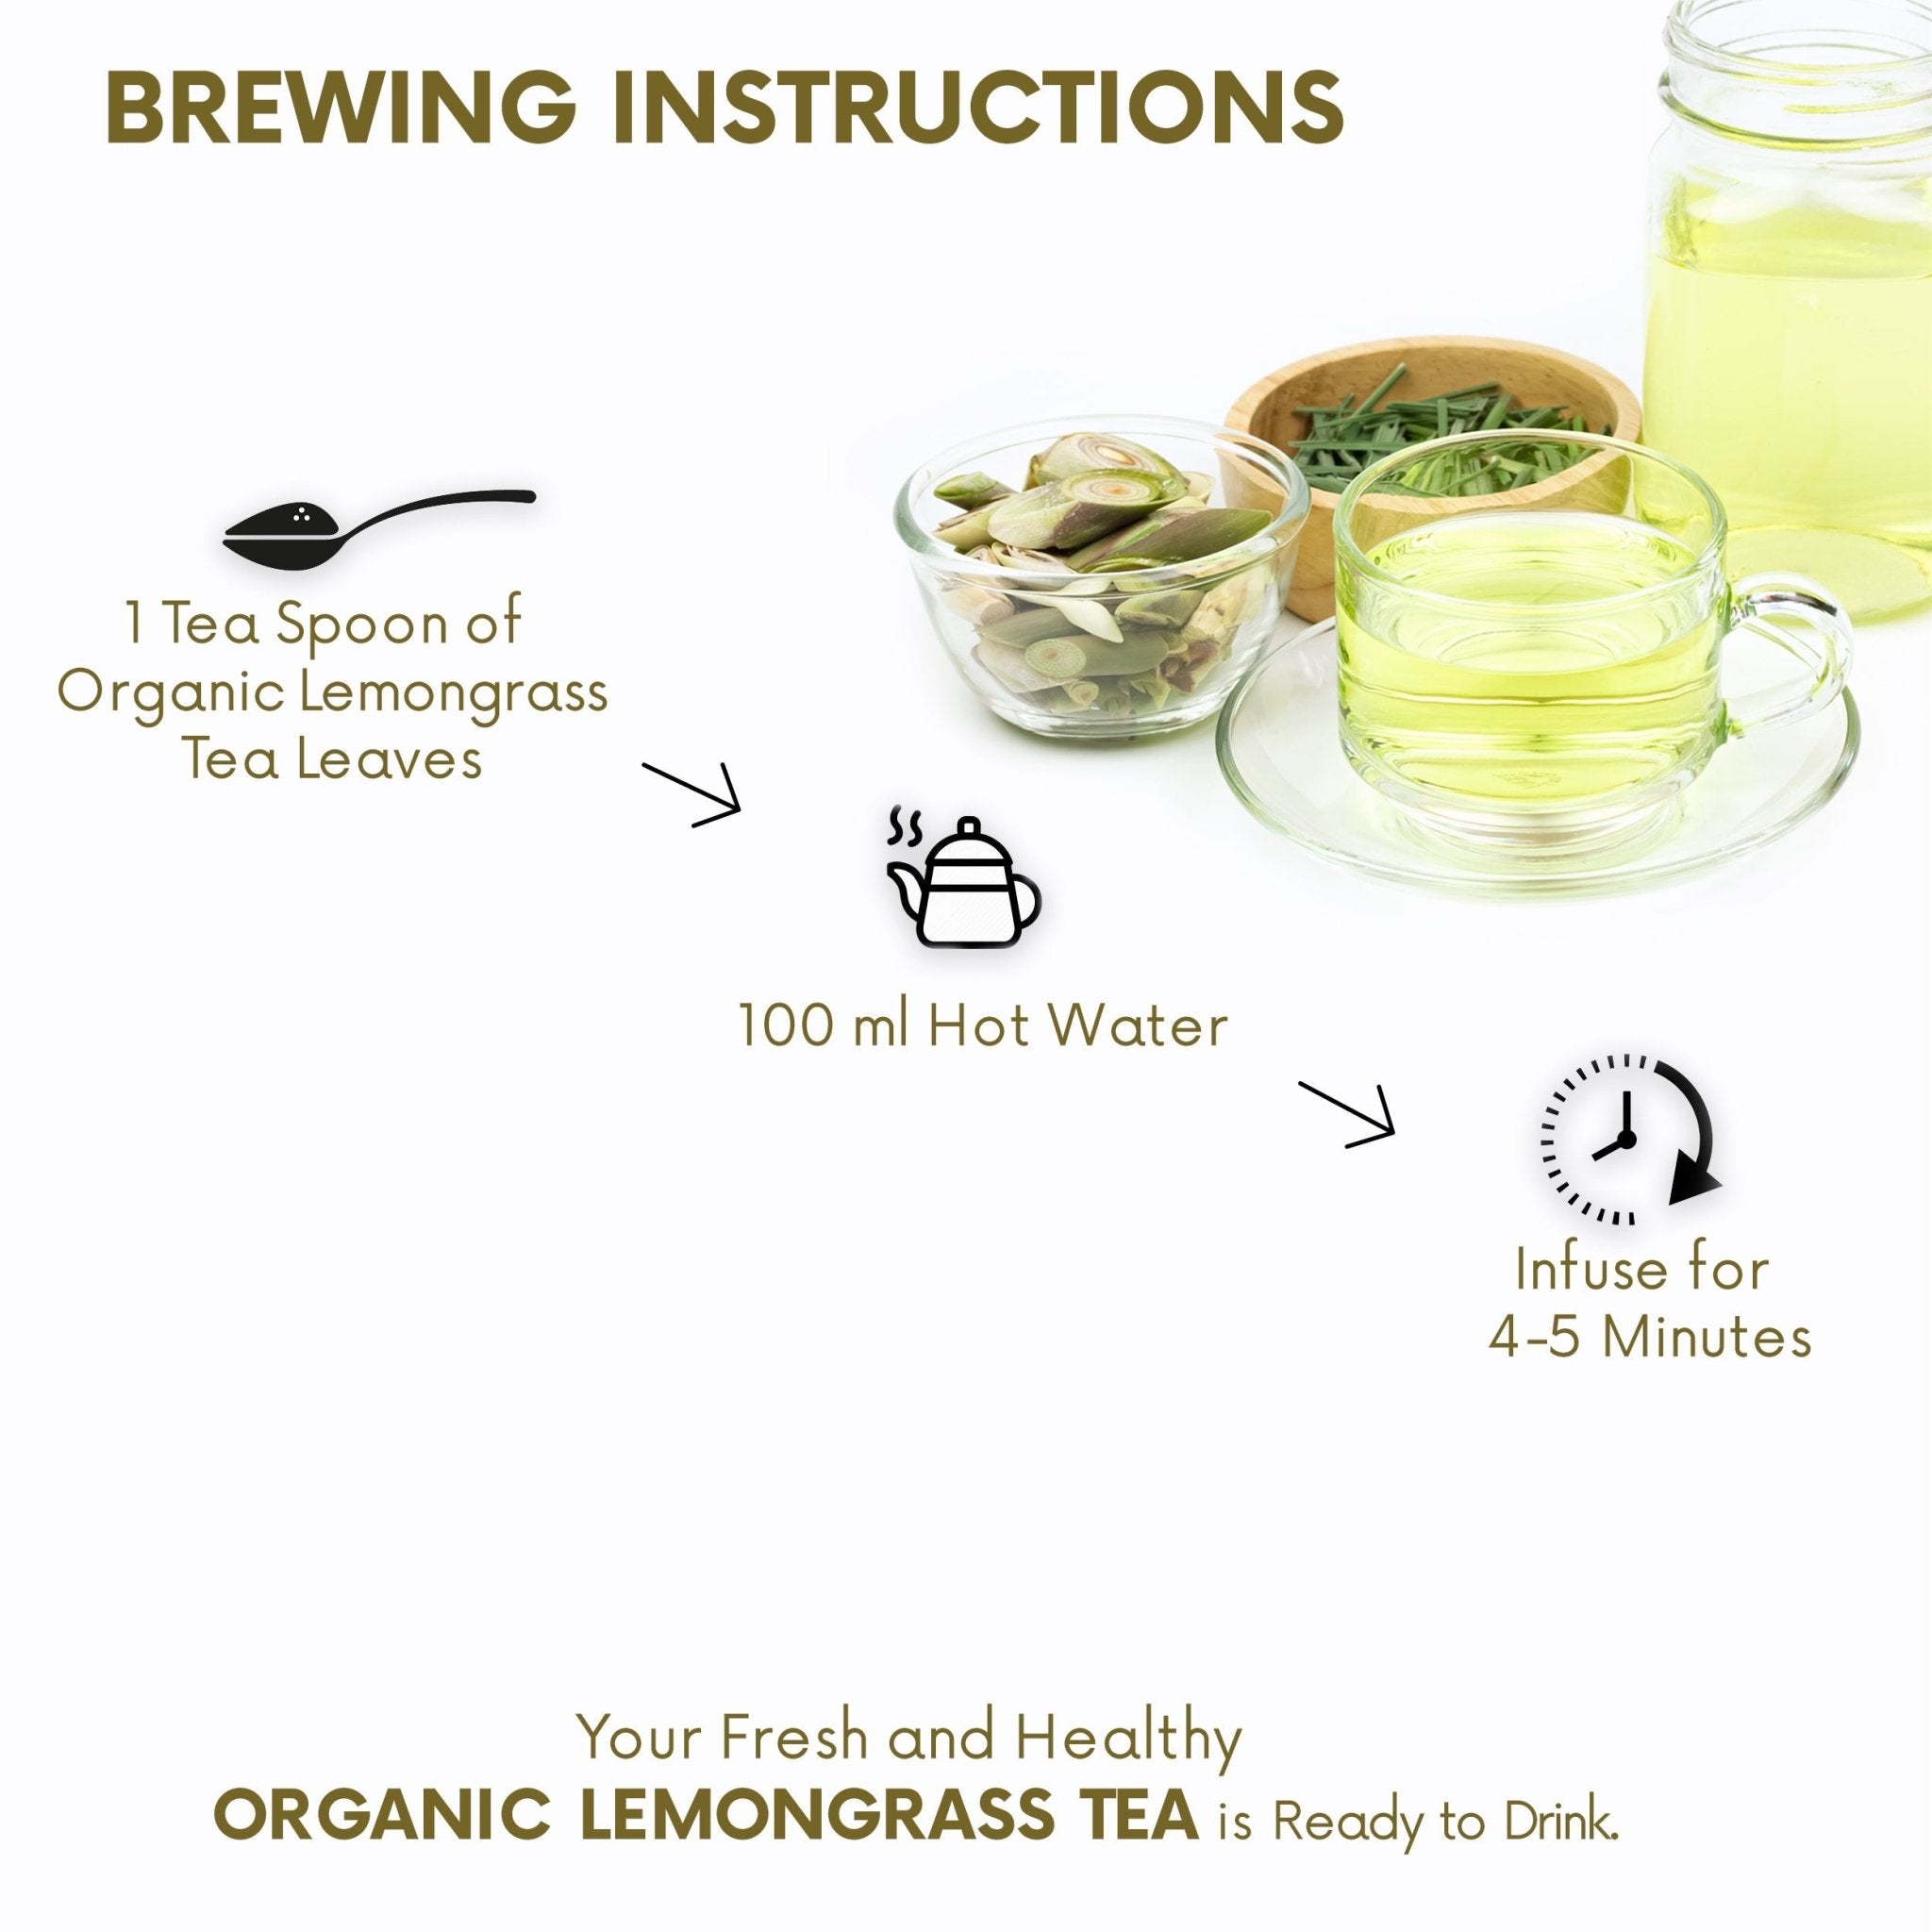 The Tea Ark Lemongrass Tea with Moroccan Mint, for Stress Relief, Daily Detox - Inlife Pharma Private Limited